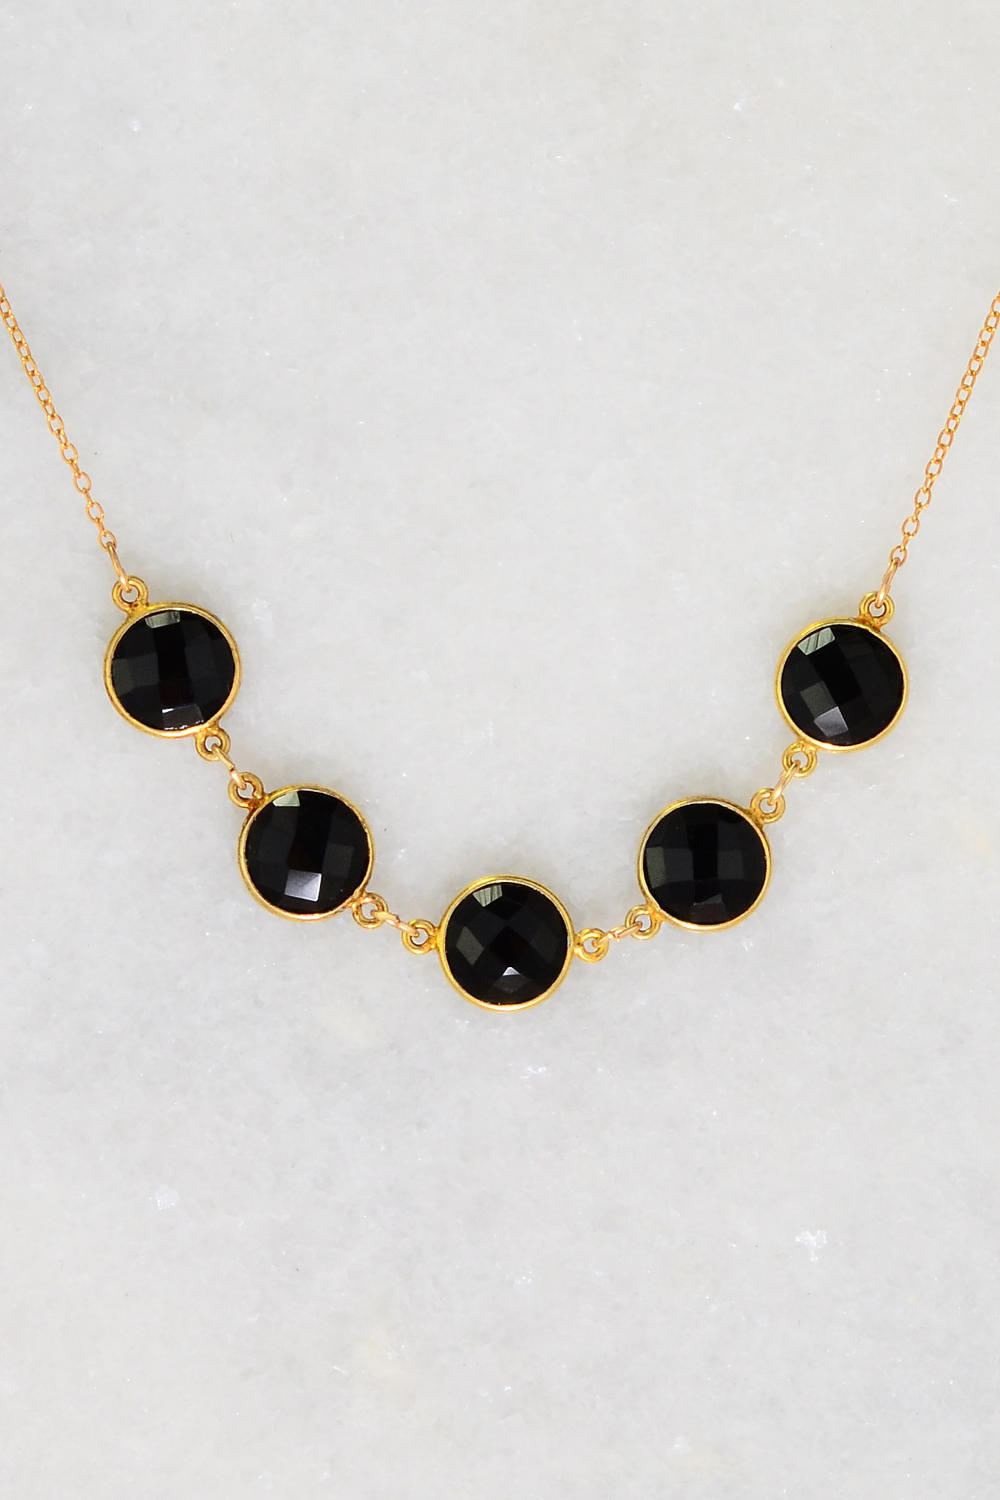 Black Onyx Necklace - Nana Necklace - Gift for mom - Mommy Necklace - Gemstone Necklace - Mother's Necklace - Bridesmaid Gift